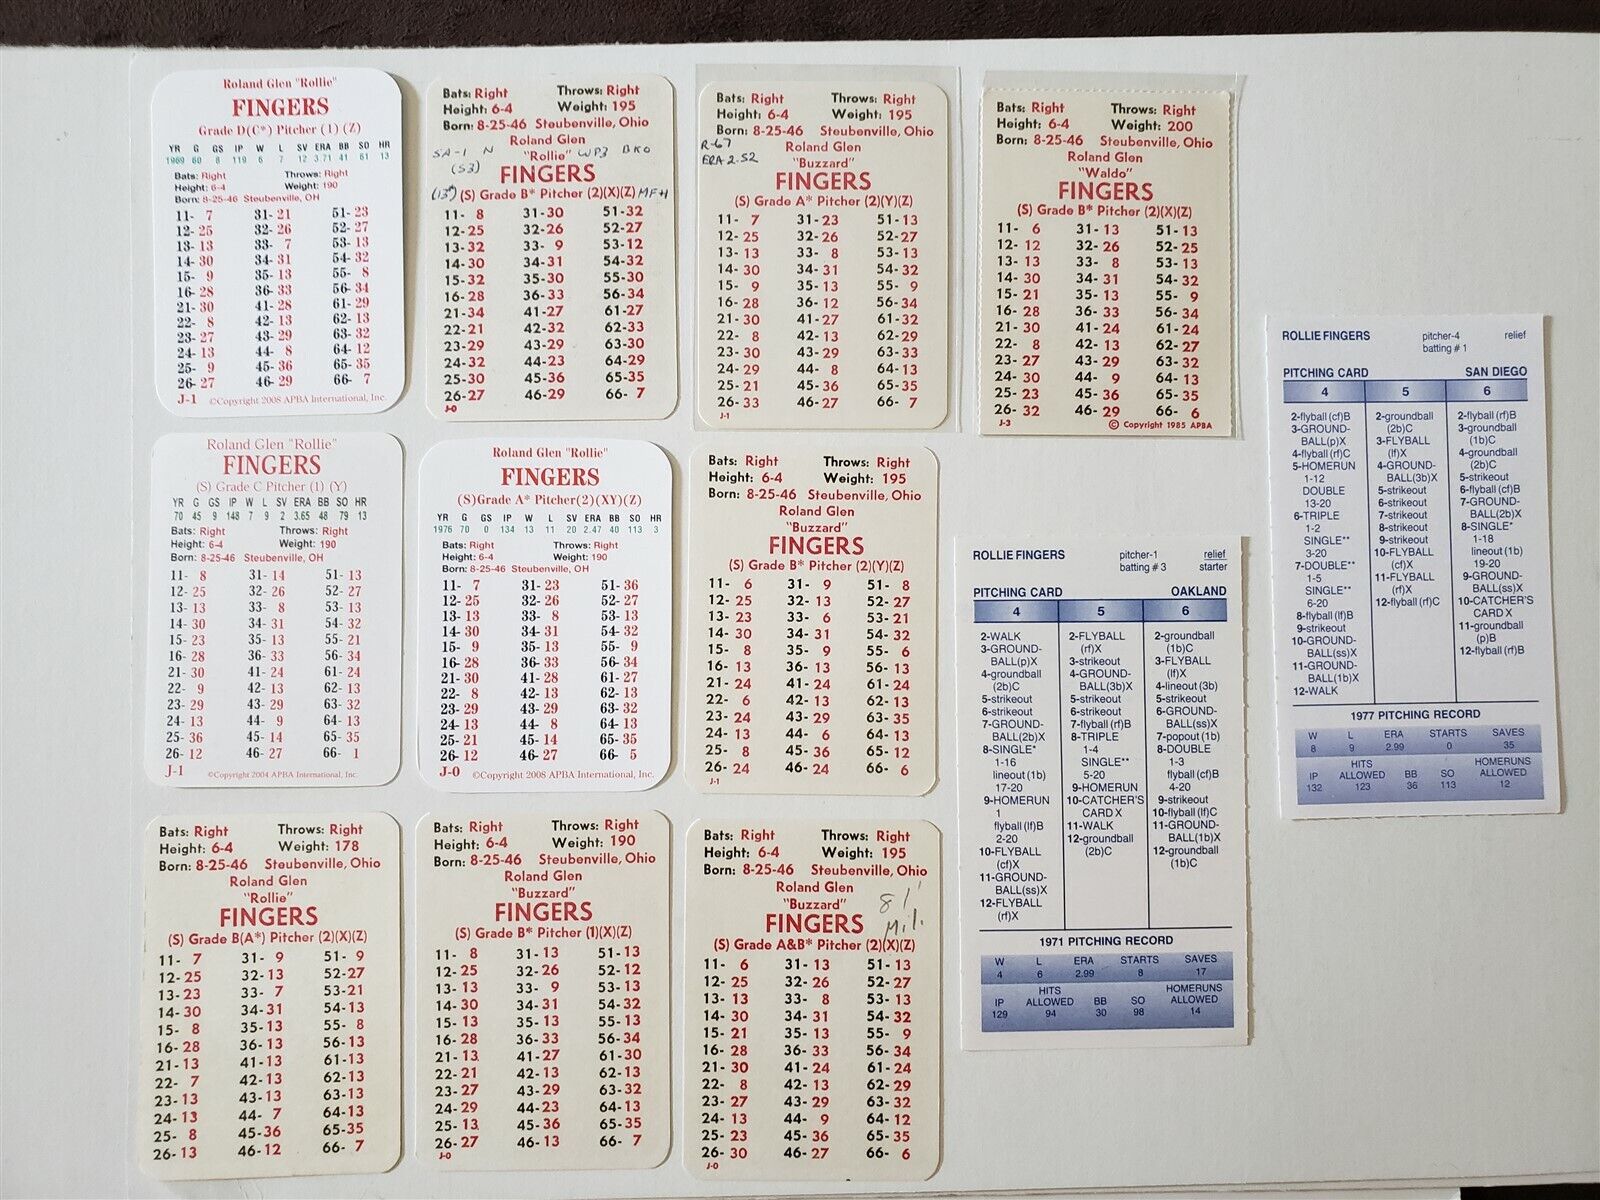 Rollie Fingers 1969 to 1985 APBA and Strat-O-Matic Card Lot of 12 Cards